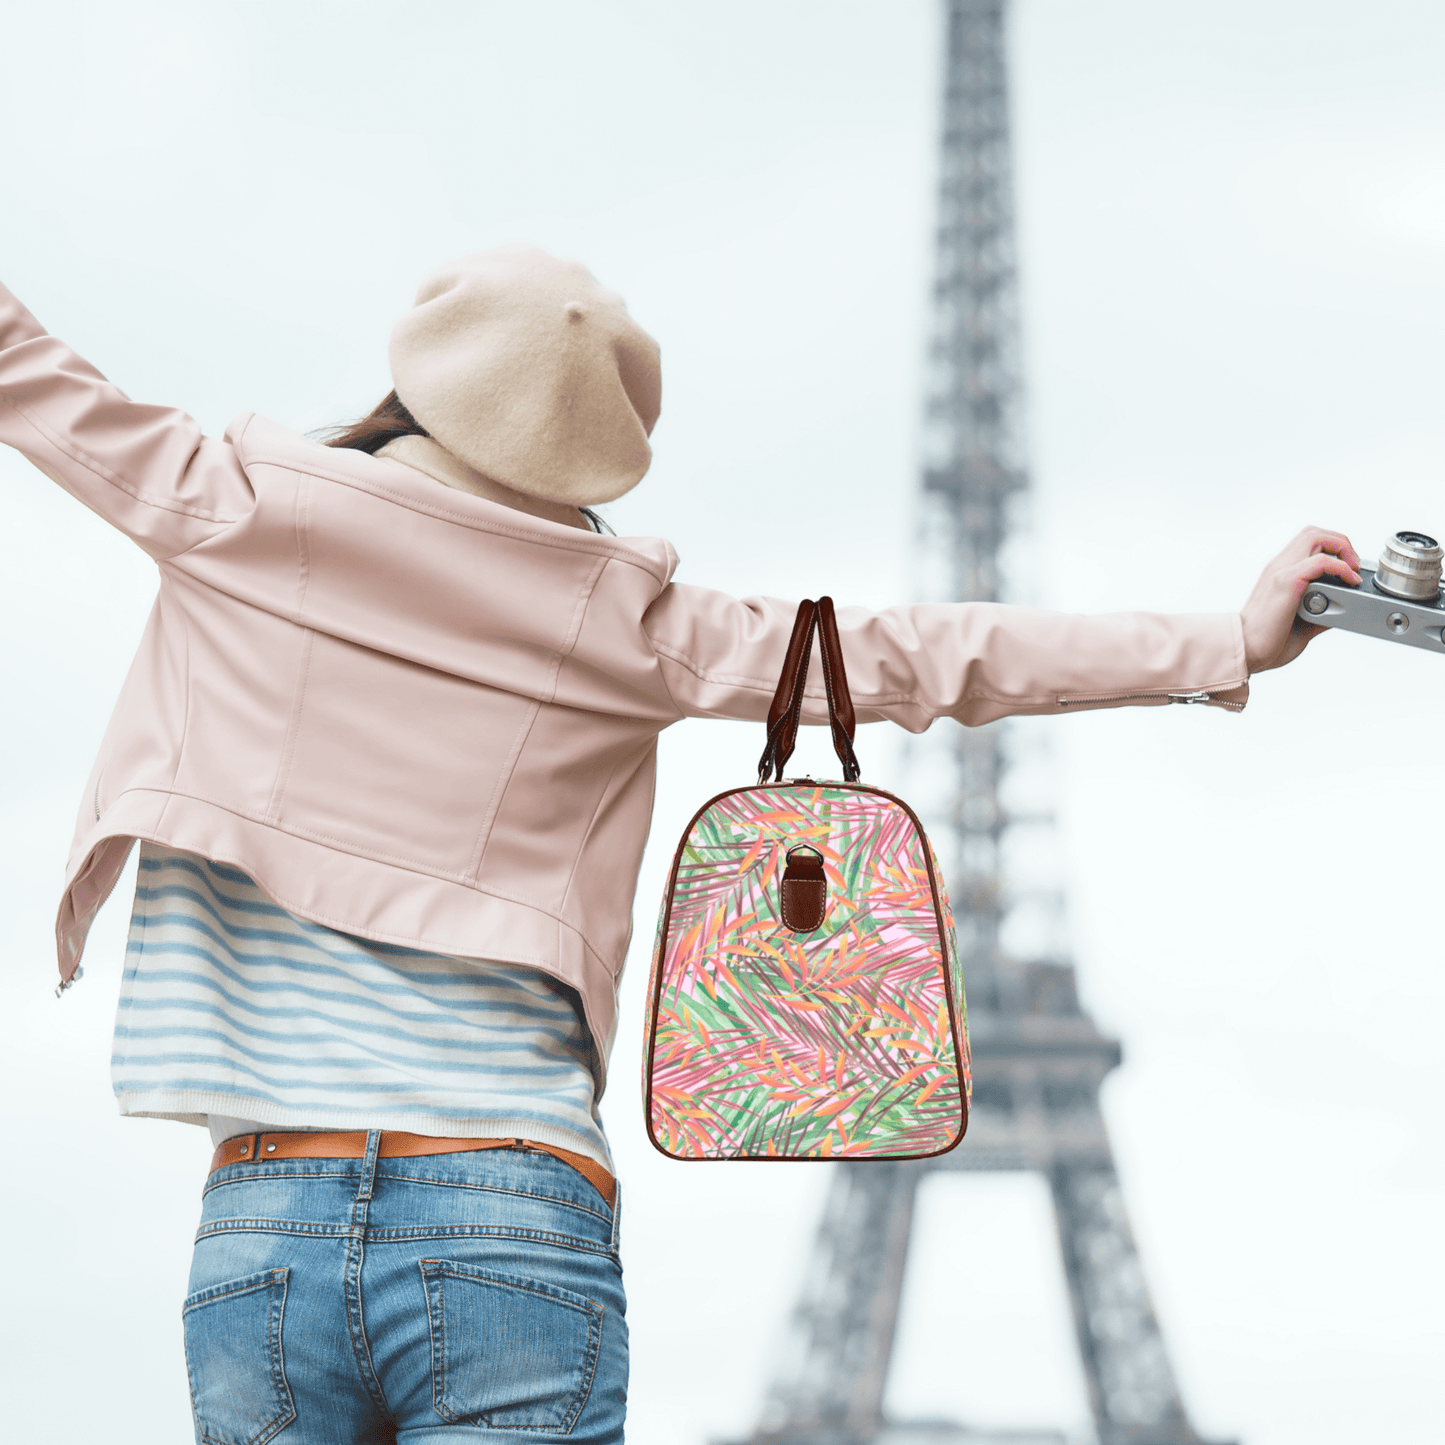 Traveling to Paris to see the Eifel tower requires the perfect stylish bag.